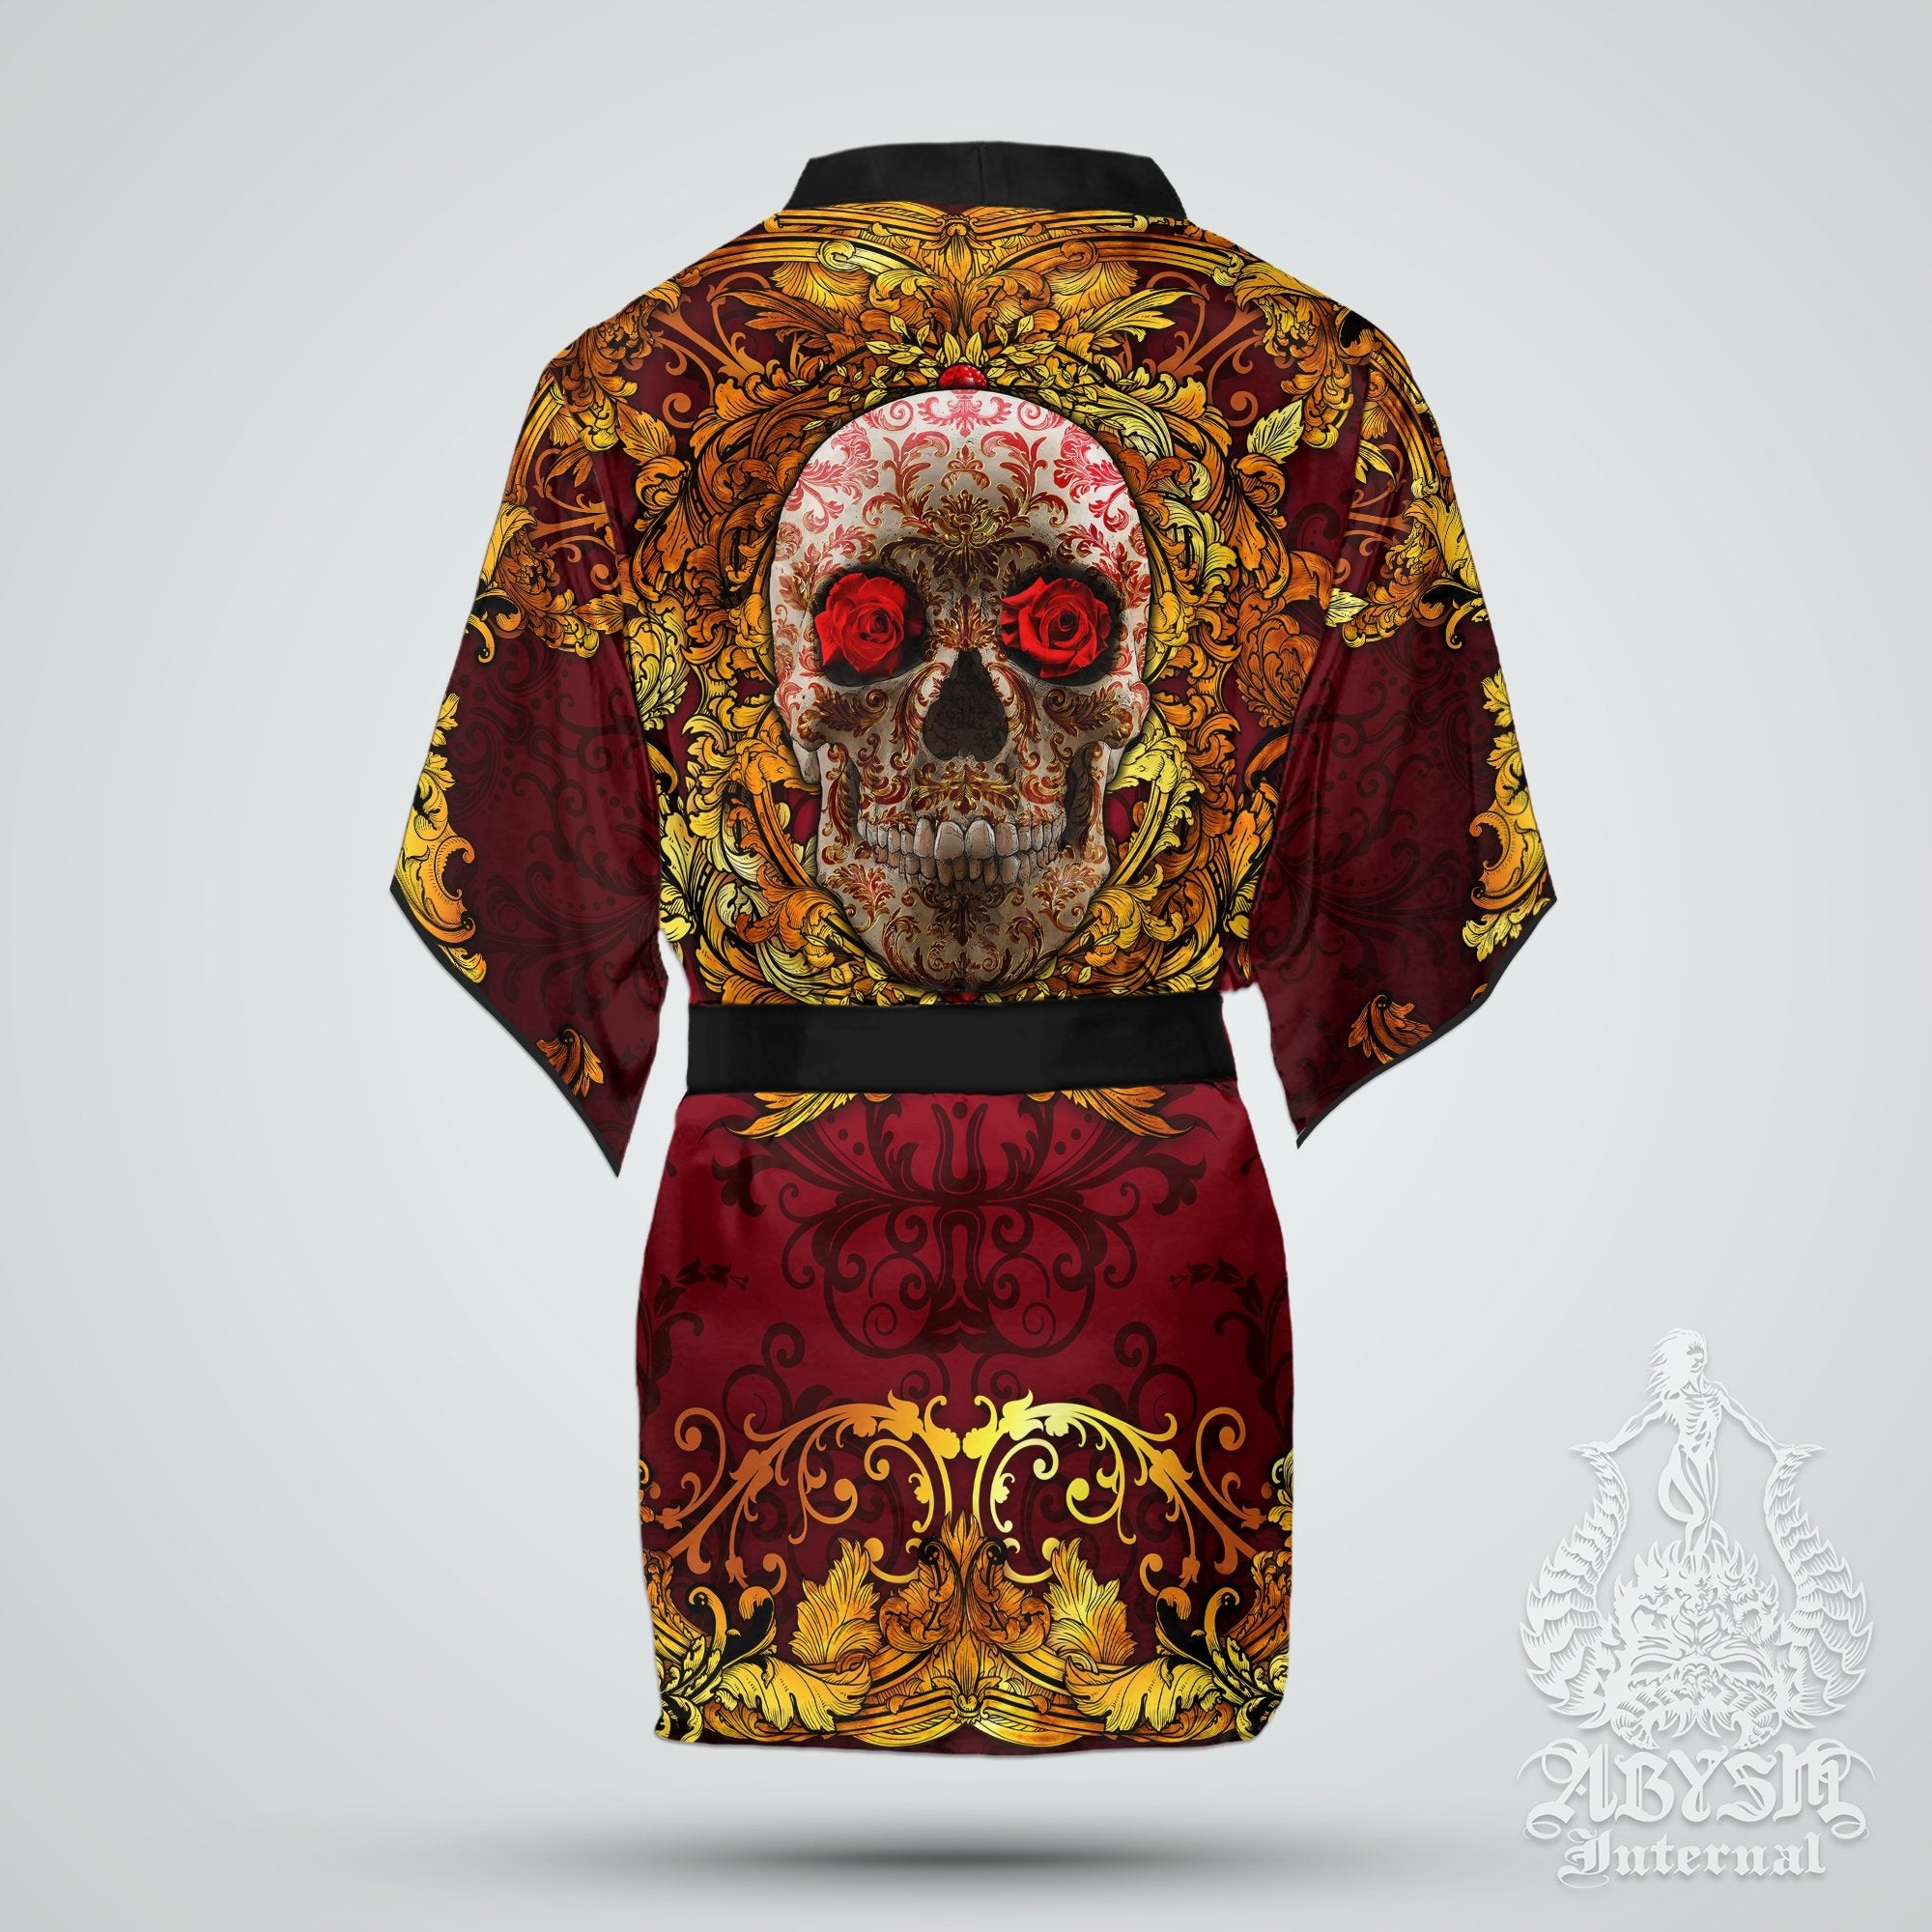 Skull Cover Up, Beach Outfit, Party Kimono, Summer Festival Robe, Goth Indie and Alternative Clothing, Unisex - Gold Red - Abysm Internal